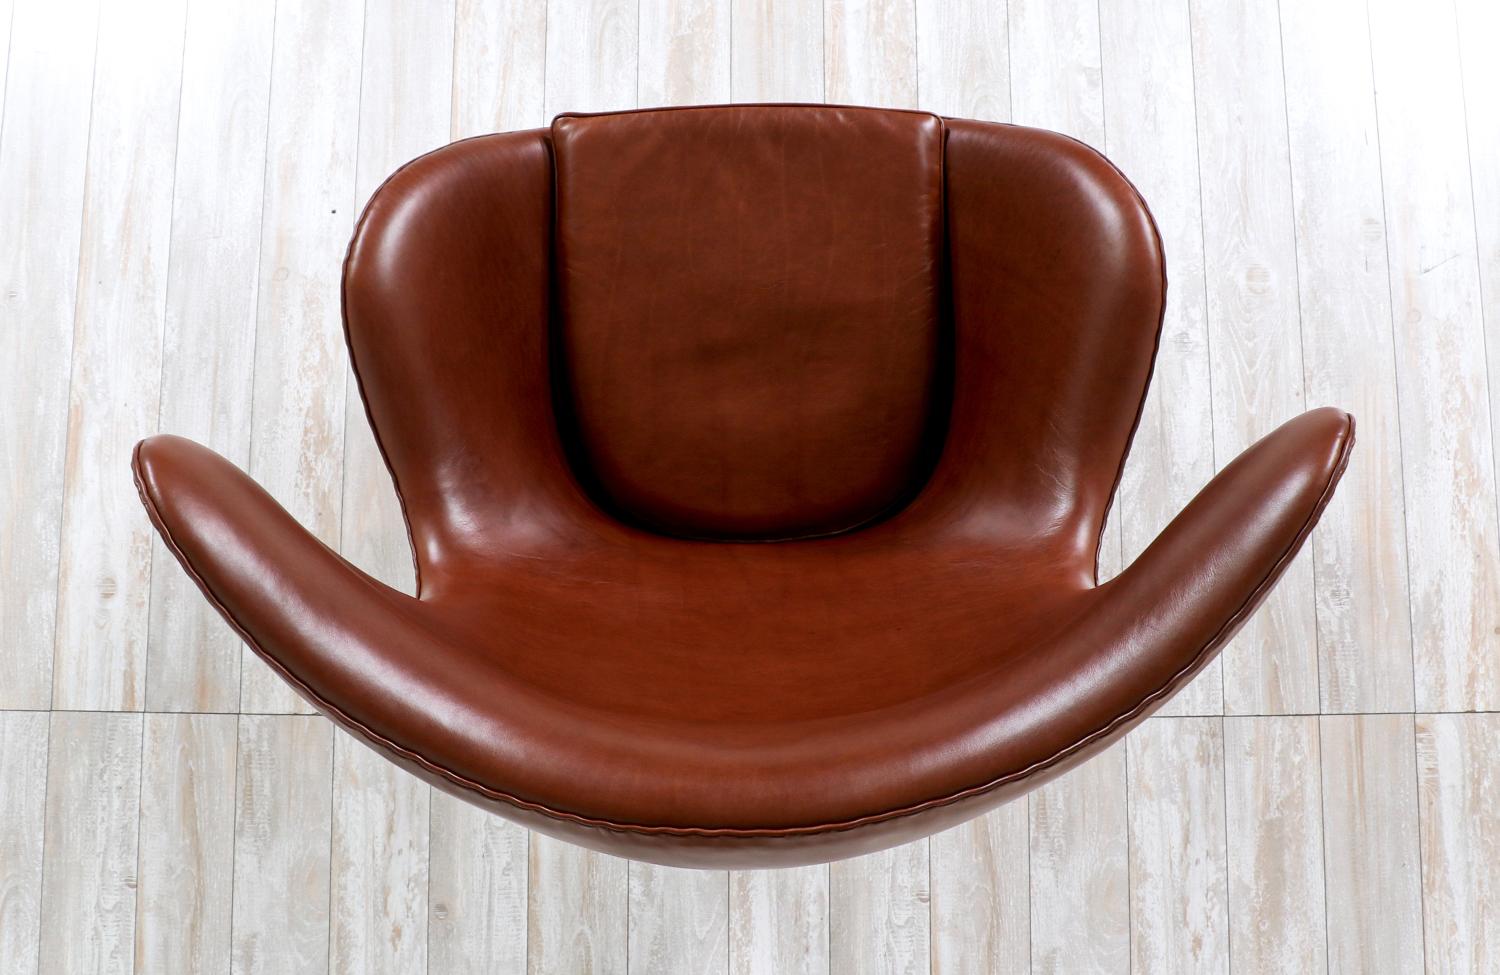 Expertly Restored - Danish Modern Cognac Leather “Egg” Chair by Arne Jacobsen For Sale 8